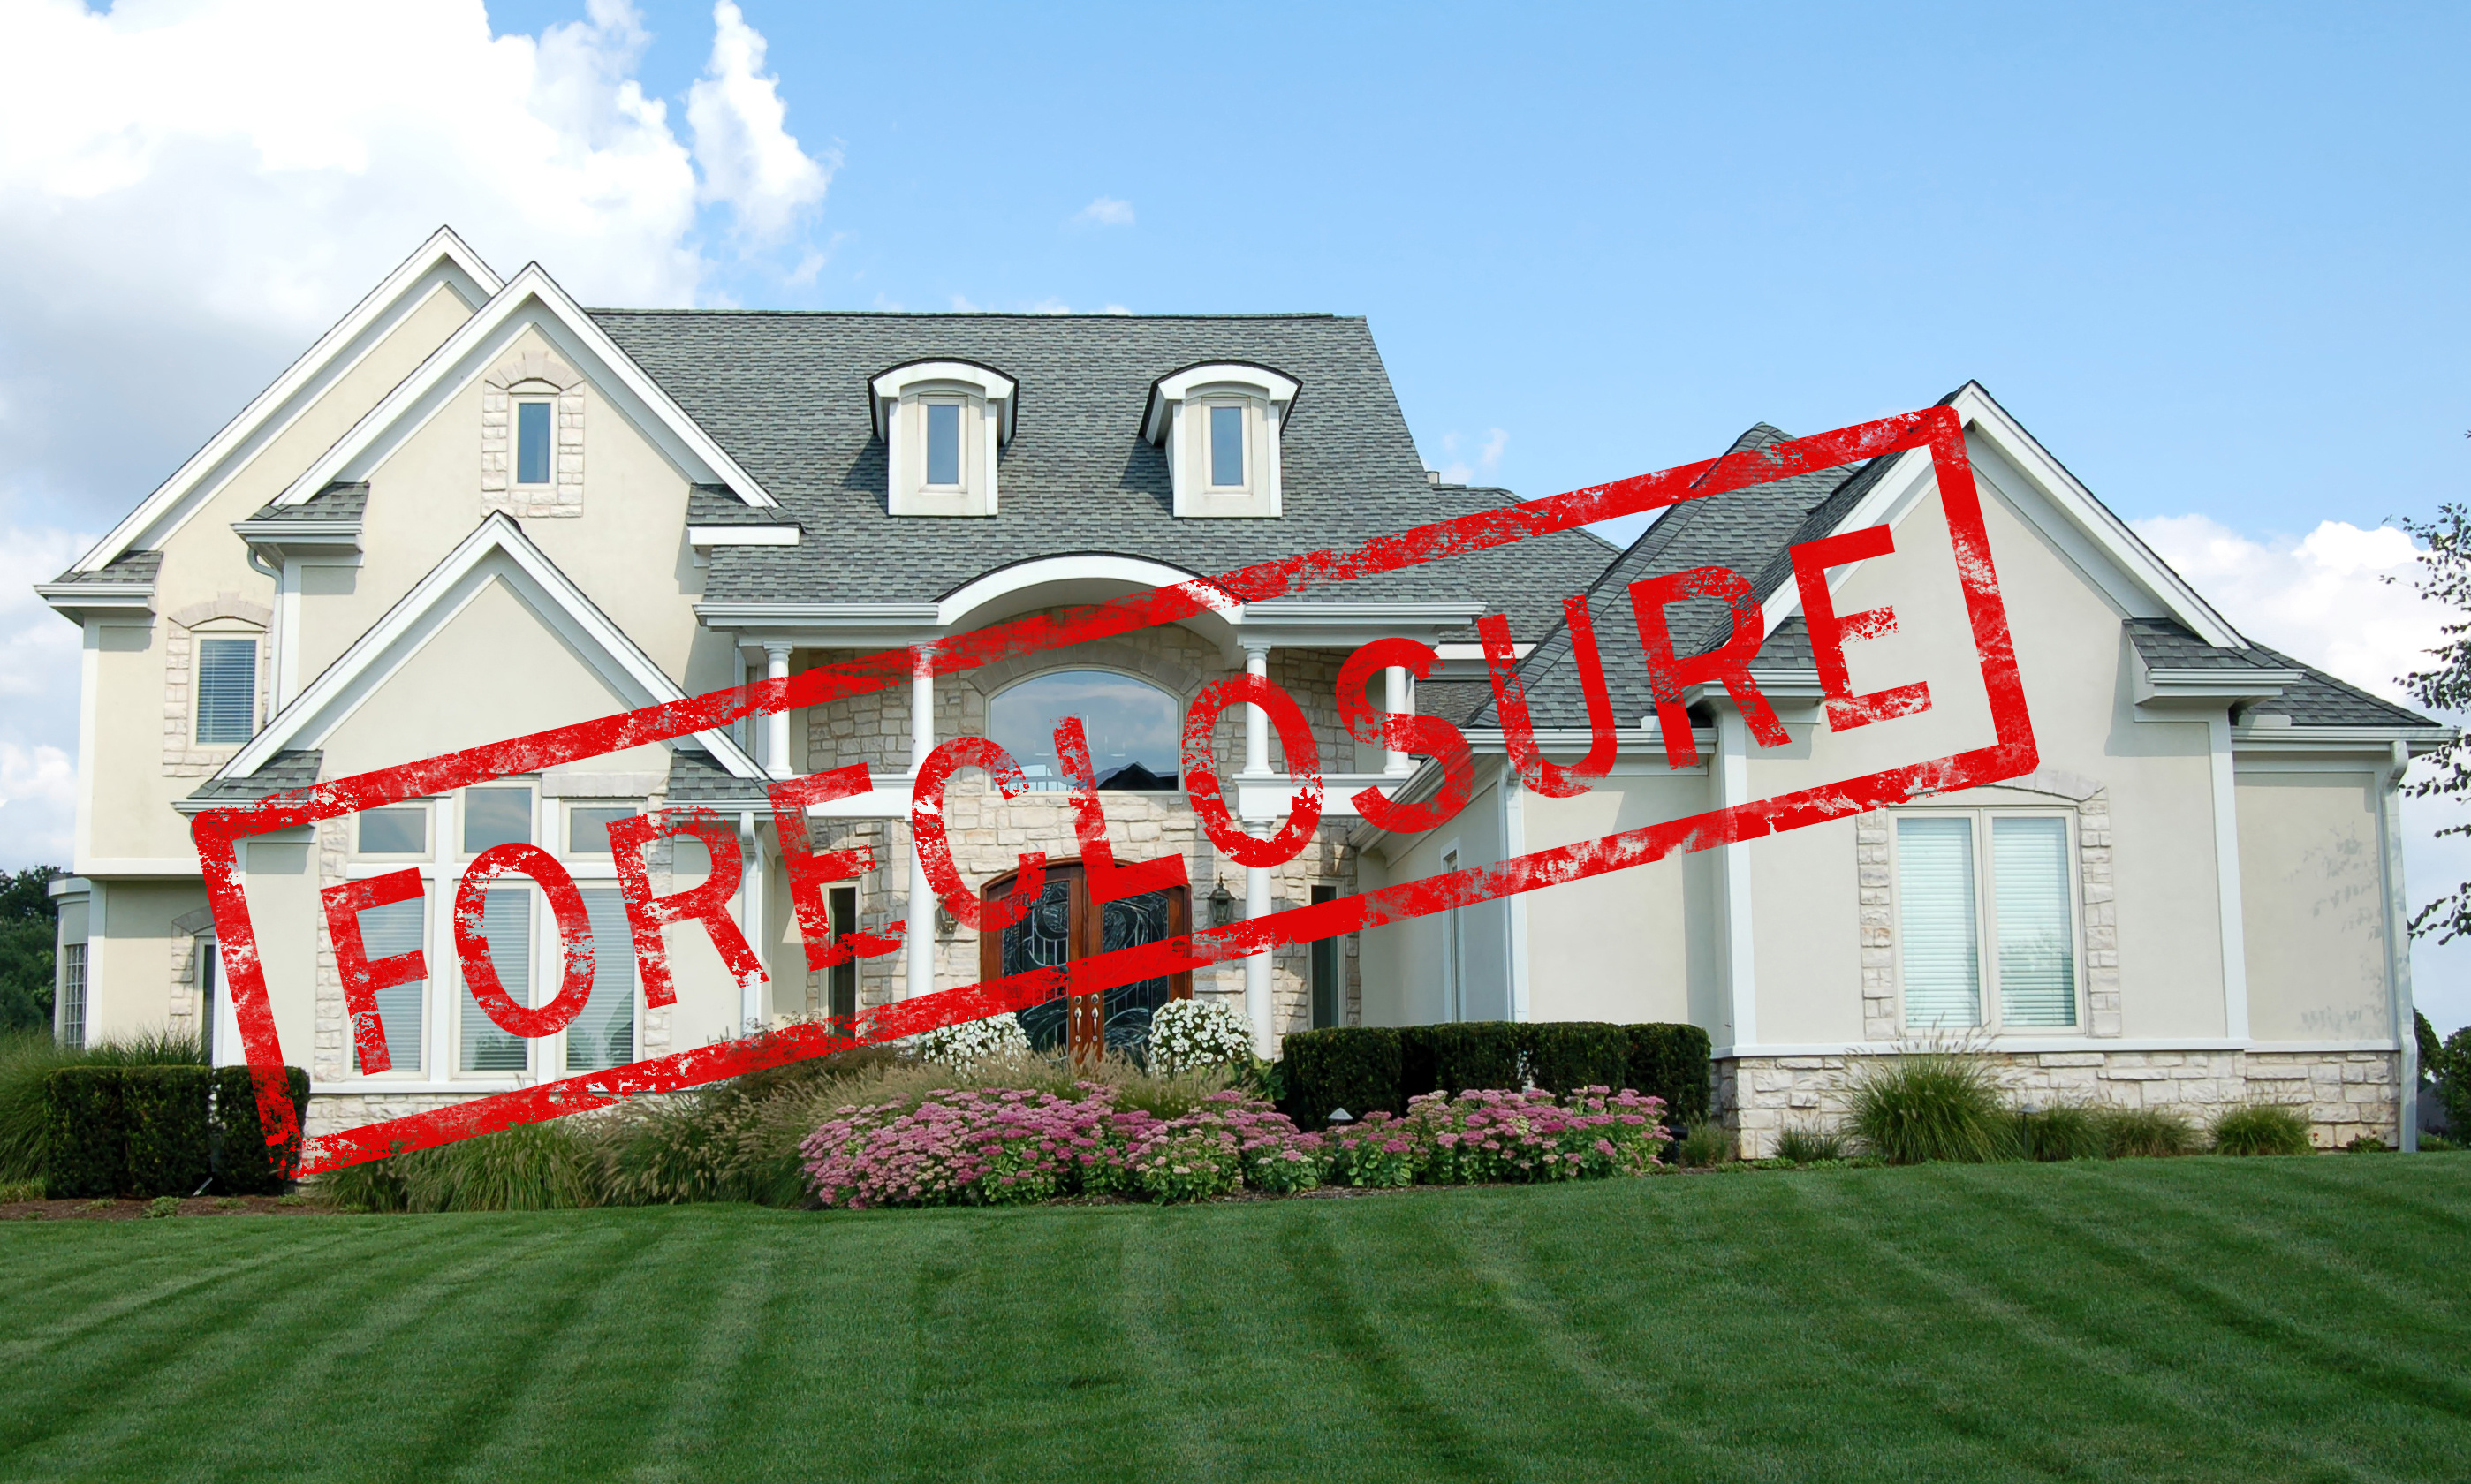 Call Mowery Appraisal Svc to discuss valuations on Putnam foreclosures